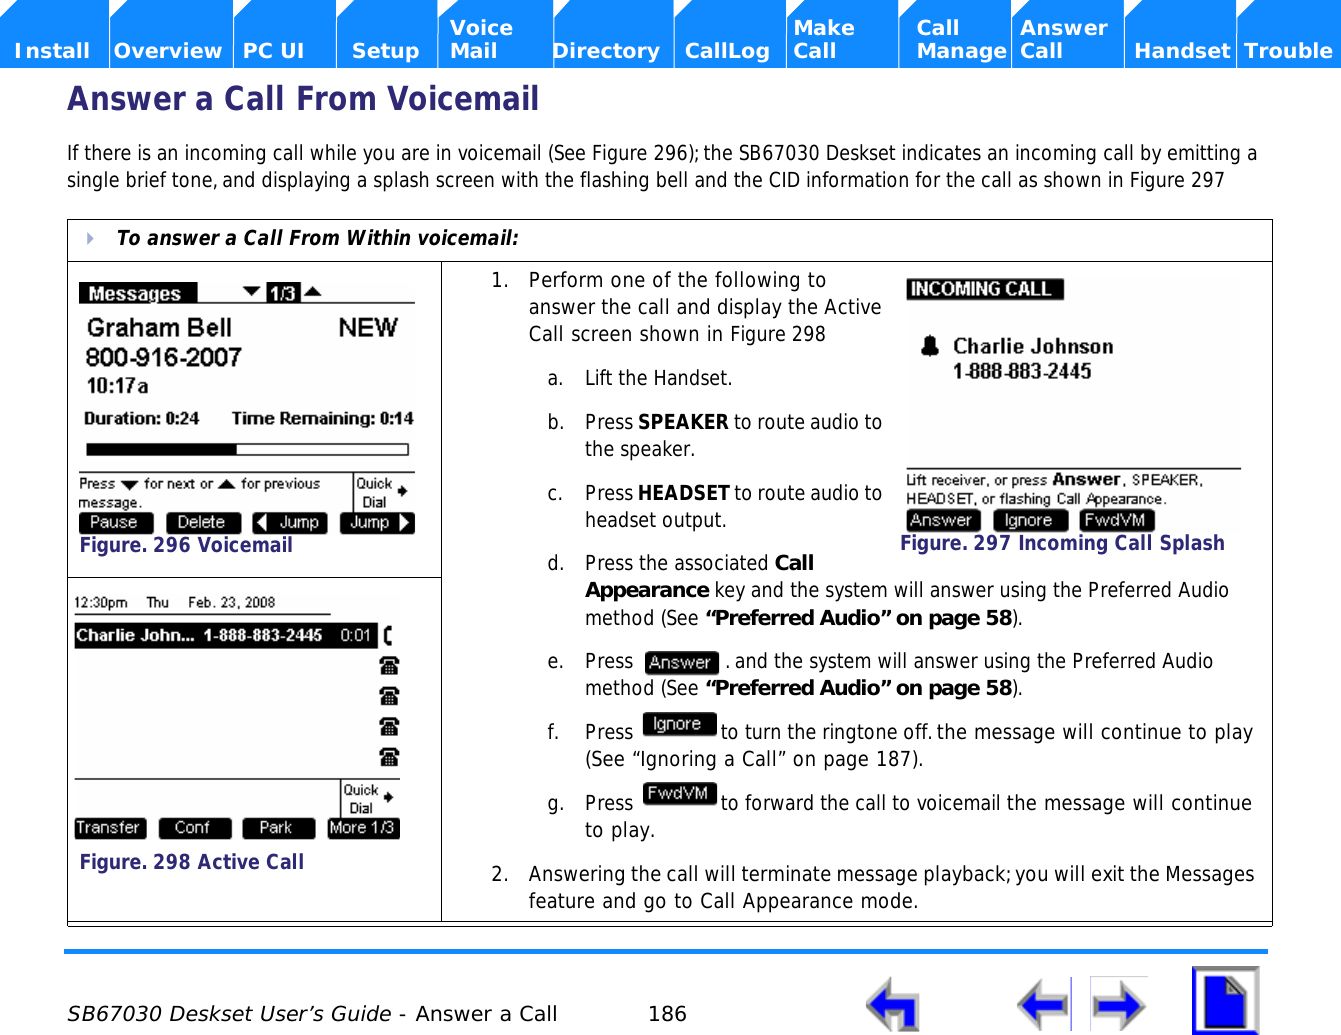  SB67030 Deskset User’s Guide - Answer a Call 186    Voice Make Call Answer  Install Overview PC UI Setup Mail Directory CallLog Call Manage Call Handset TroubleAnswer a Call From VoicemailIf there is an incoming call while you are in voicemail (See Figure 296); the SB67030 Deskset indicates an incoming call by emitting a single brief tone, and displaying a splash screen with the flashing bell and the CID information for the call as shown in Figure 297  To answer a Call From Within voicemail:1. Perform one of the following to answer the call and display the Active Call screen shown in Figure 298a. Lift the Handset.b. Press SPEAKER to route audio to the speaker.c. Press HEADSET to route audio to headset output.d. Press the associated Call Appearance key and the system will answer using the Preferred Audio method (See “Preferred Audio” on page 58).e. Press  . and the system will answer using the Preferred Audio method (See “Preferred Audio” on page 58).f. Press  to turn the ringtone off. the message will continue to play (See “Ignoring a Call” on page 187). g. Press  to forward the call to voicemail the message will continue to play.2. Answering the call will terminate message playback; you will exit the Messages feature and go to Call Appearance mode. Figure. 296 VoicemailFigure. 297 Incoming Call SplashFigure. 298 Active Call